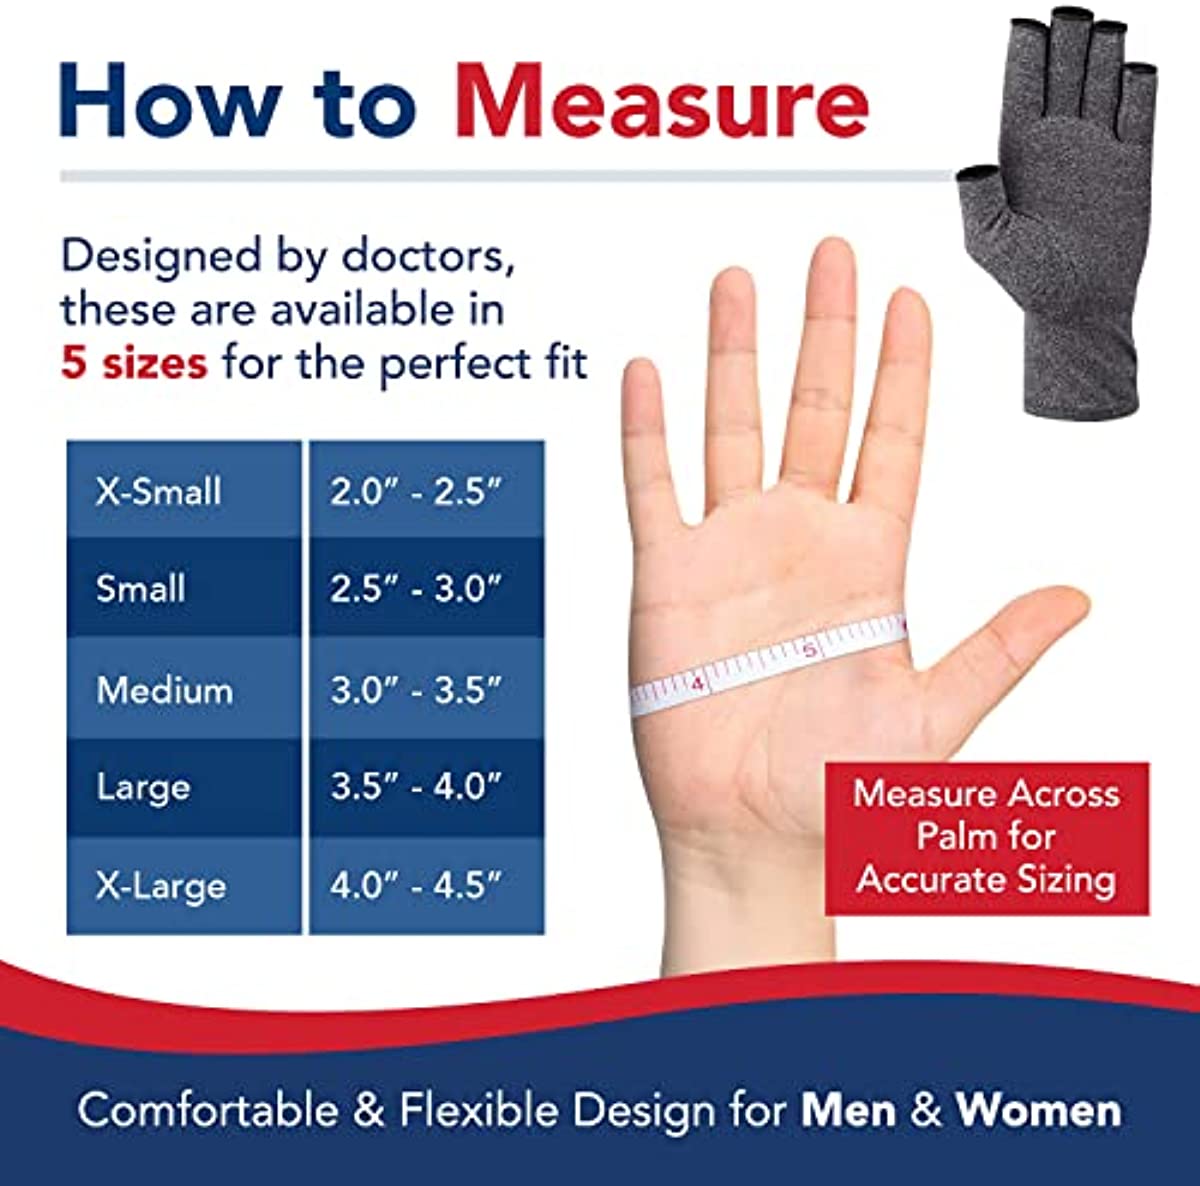 Compression Gloves for Women and Men: Arthritis Pain Relief for Hands, Daily Comfortable Wrist Support by Dr. Arthritis (Medium,2 Pairs)